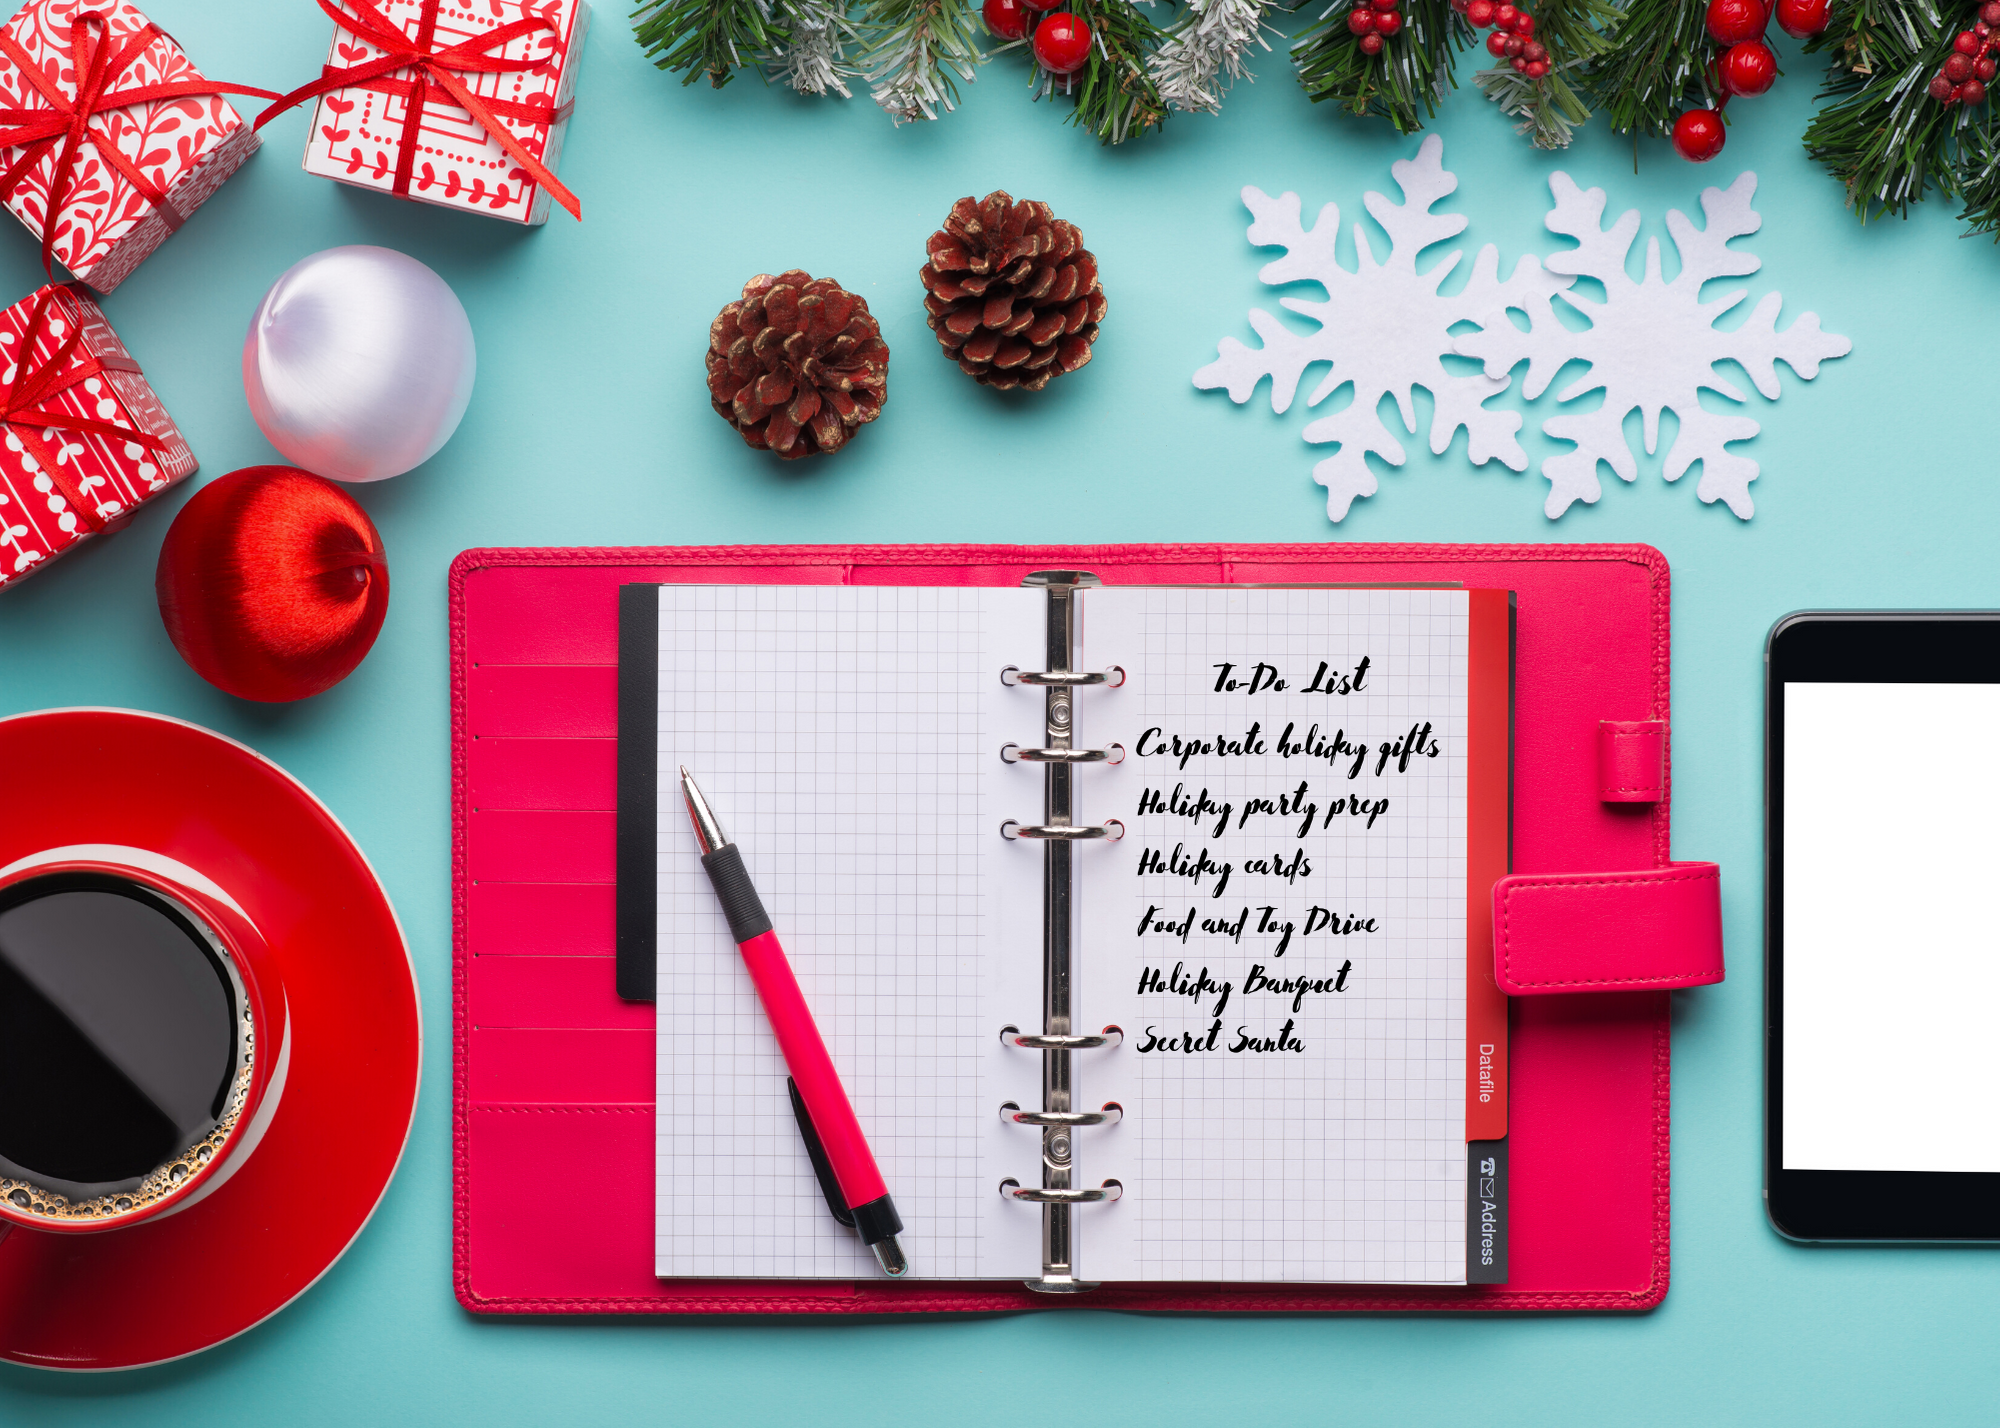 Check corporate holiday gifts off of your to-do list